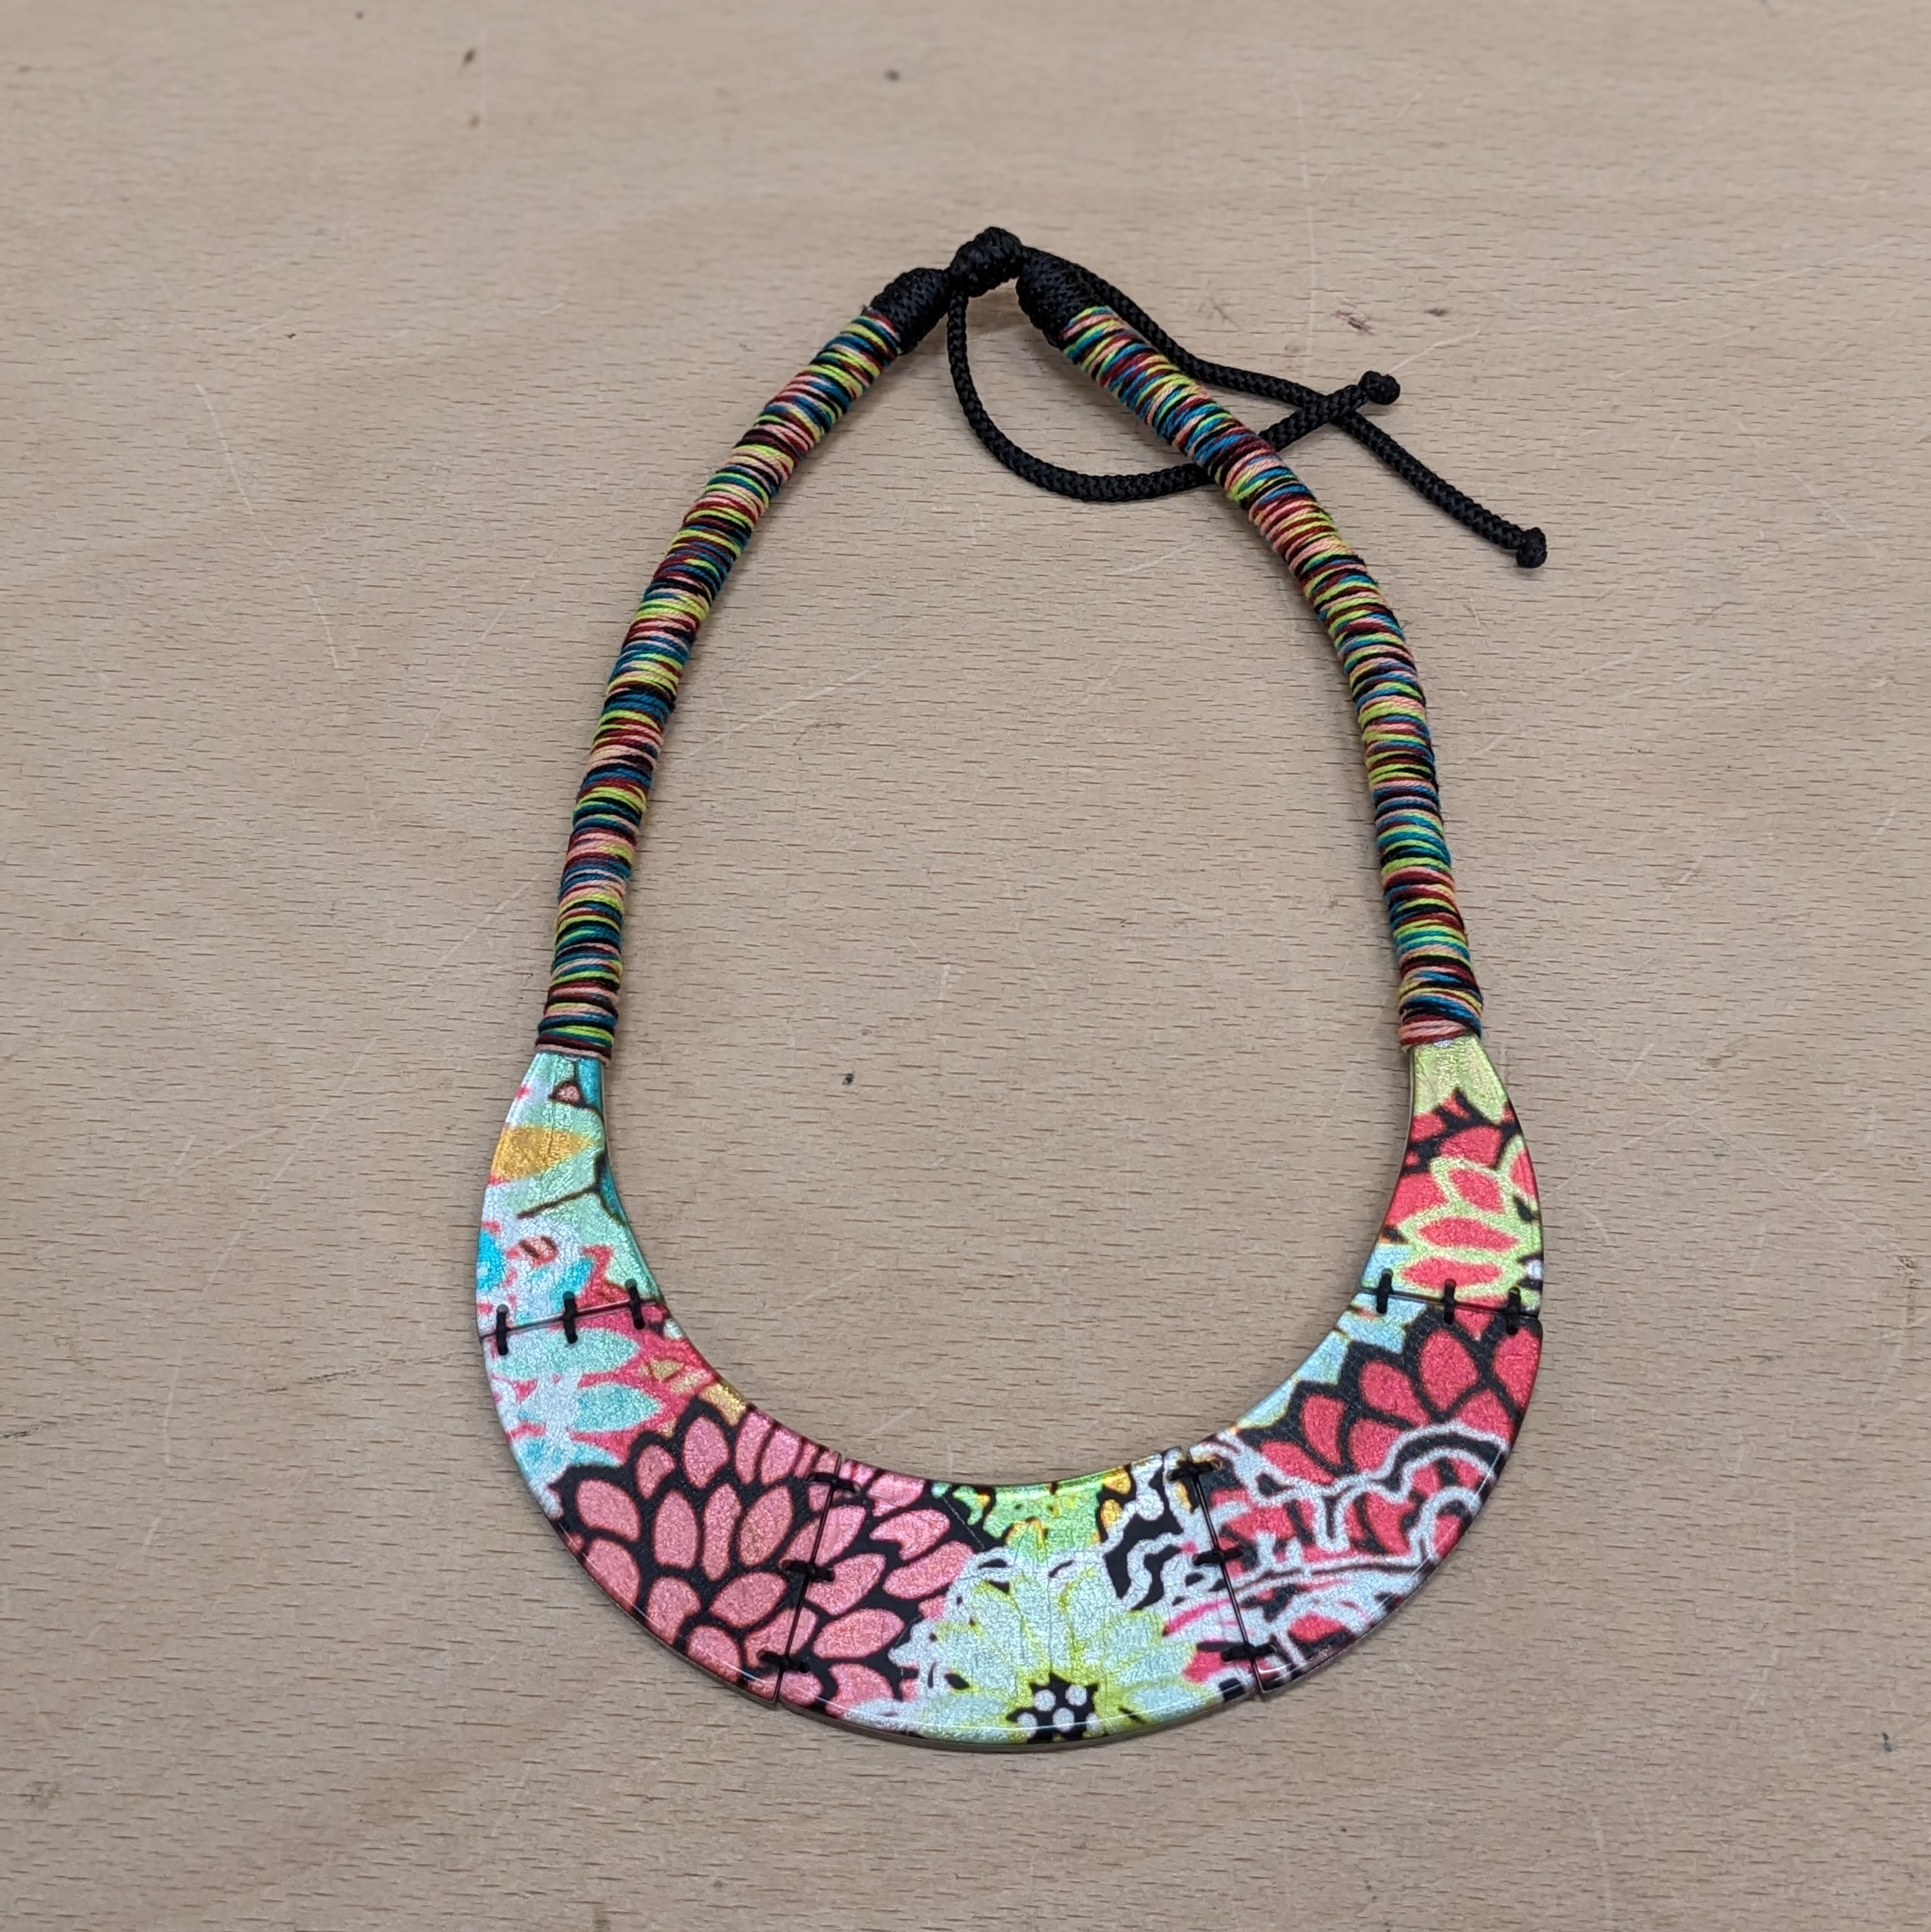 Main picture of Culture Vulture statement necklace multicoloured floral rope design